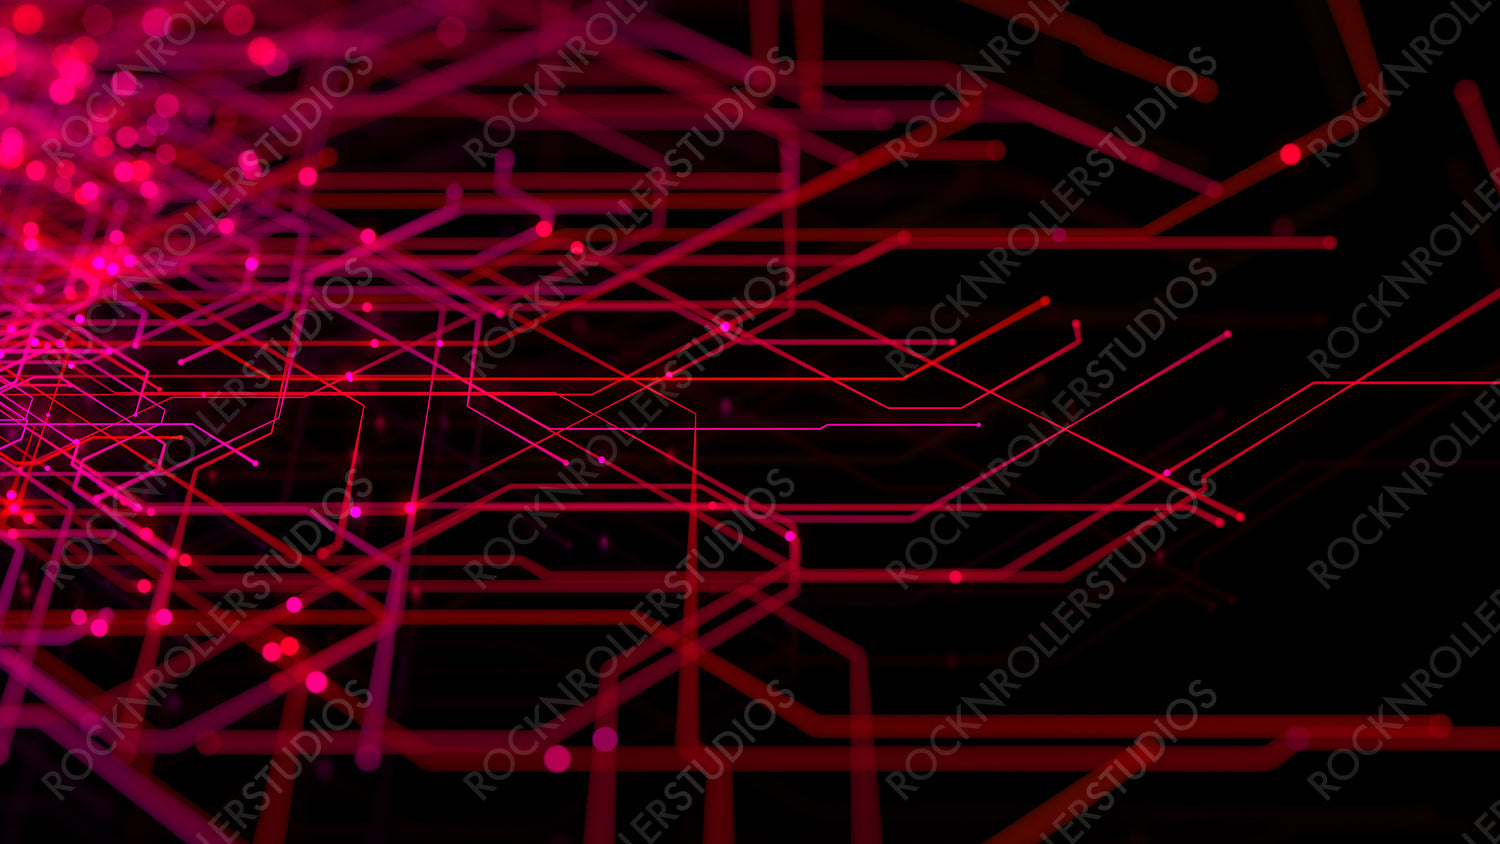 Red and Pink Geometric Lines form a Futuristic Technical Grid. Computing Concept.